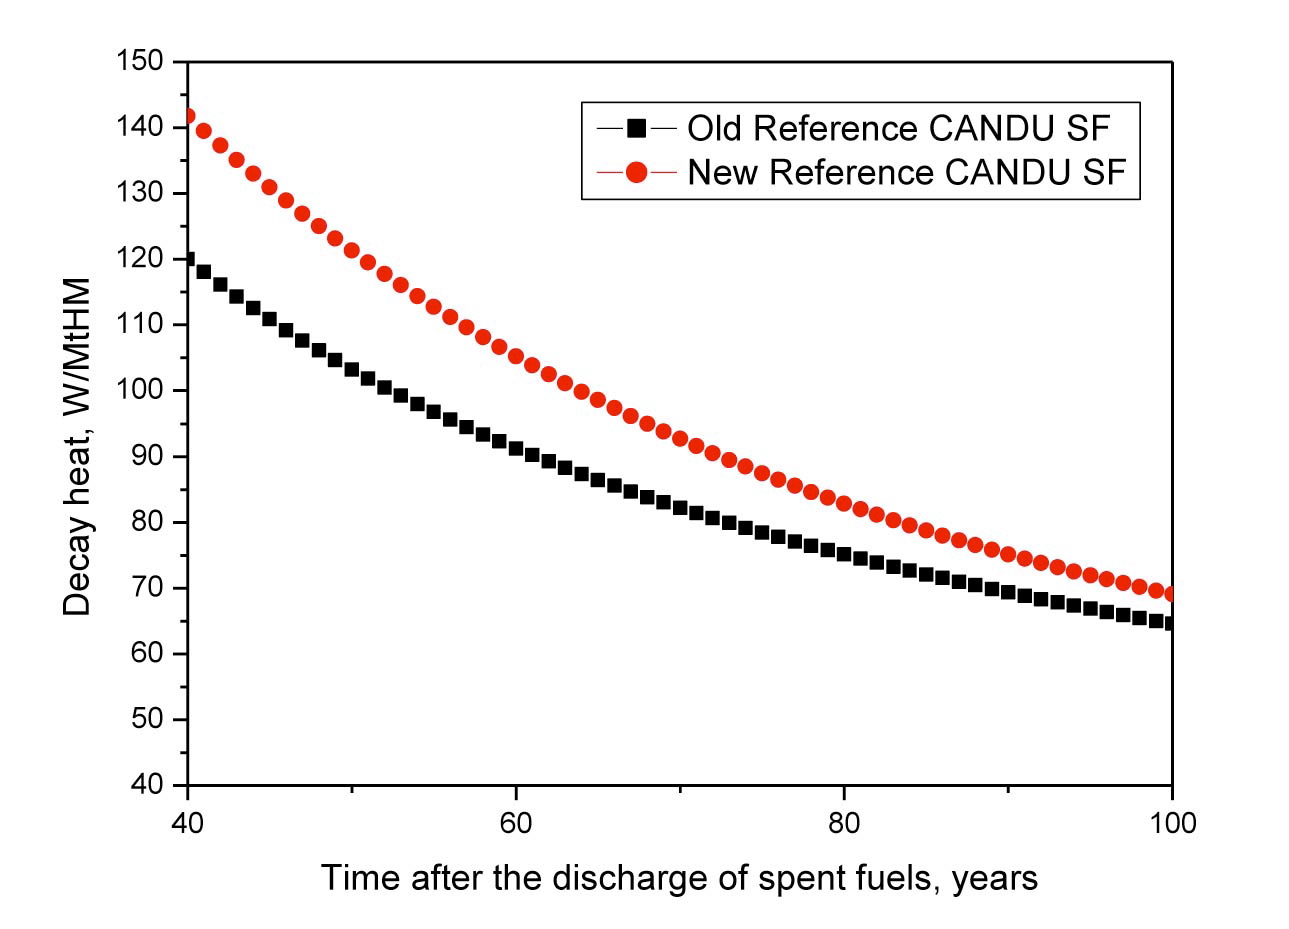 Comparison of Decay Heats from Old and New Reference CANDU Spent Fuel.